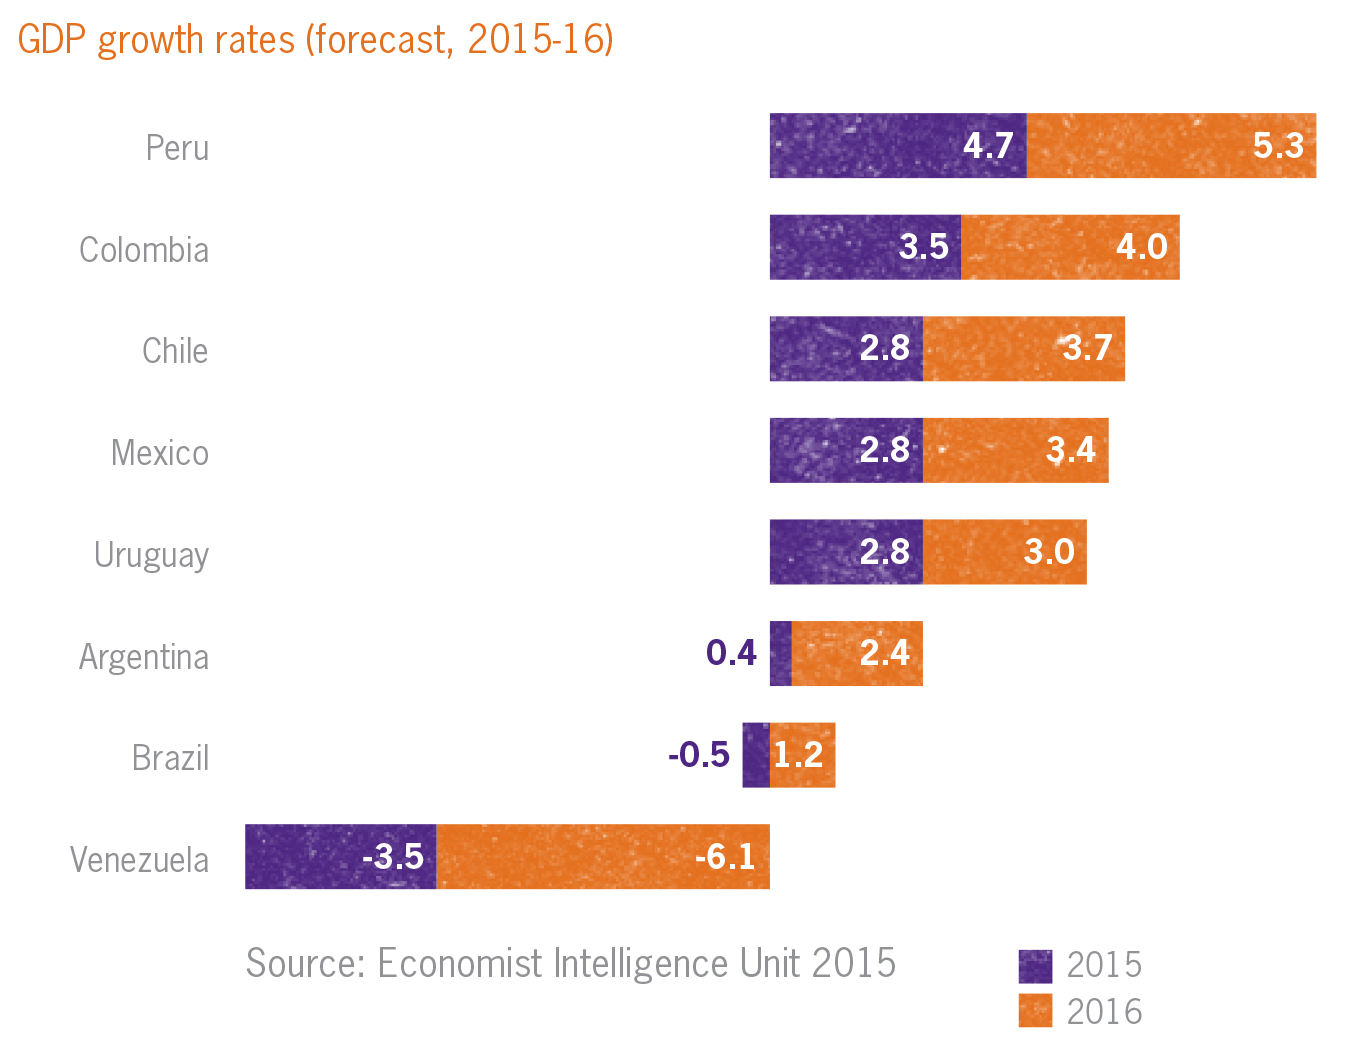 GDP growth rates in Latin America 2015-16